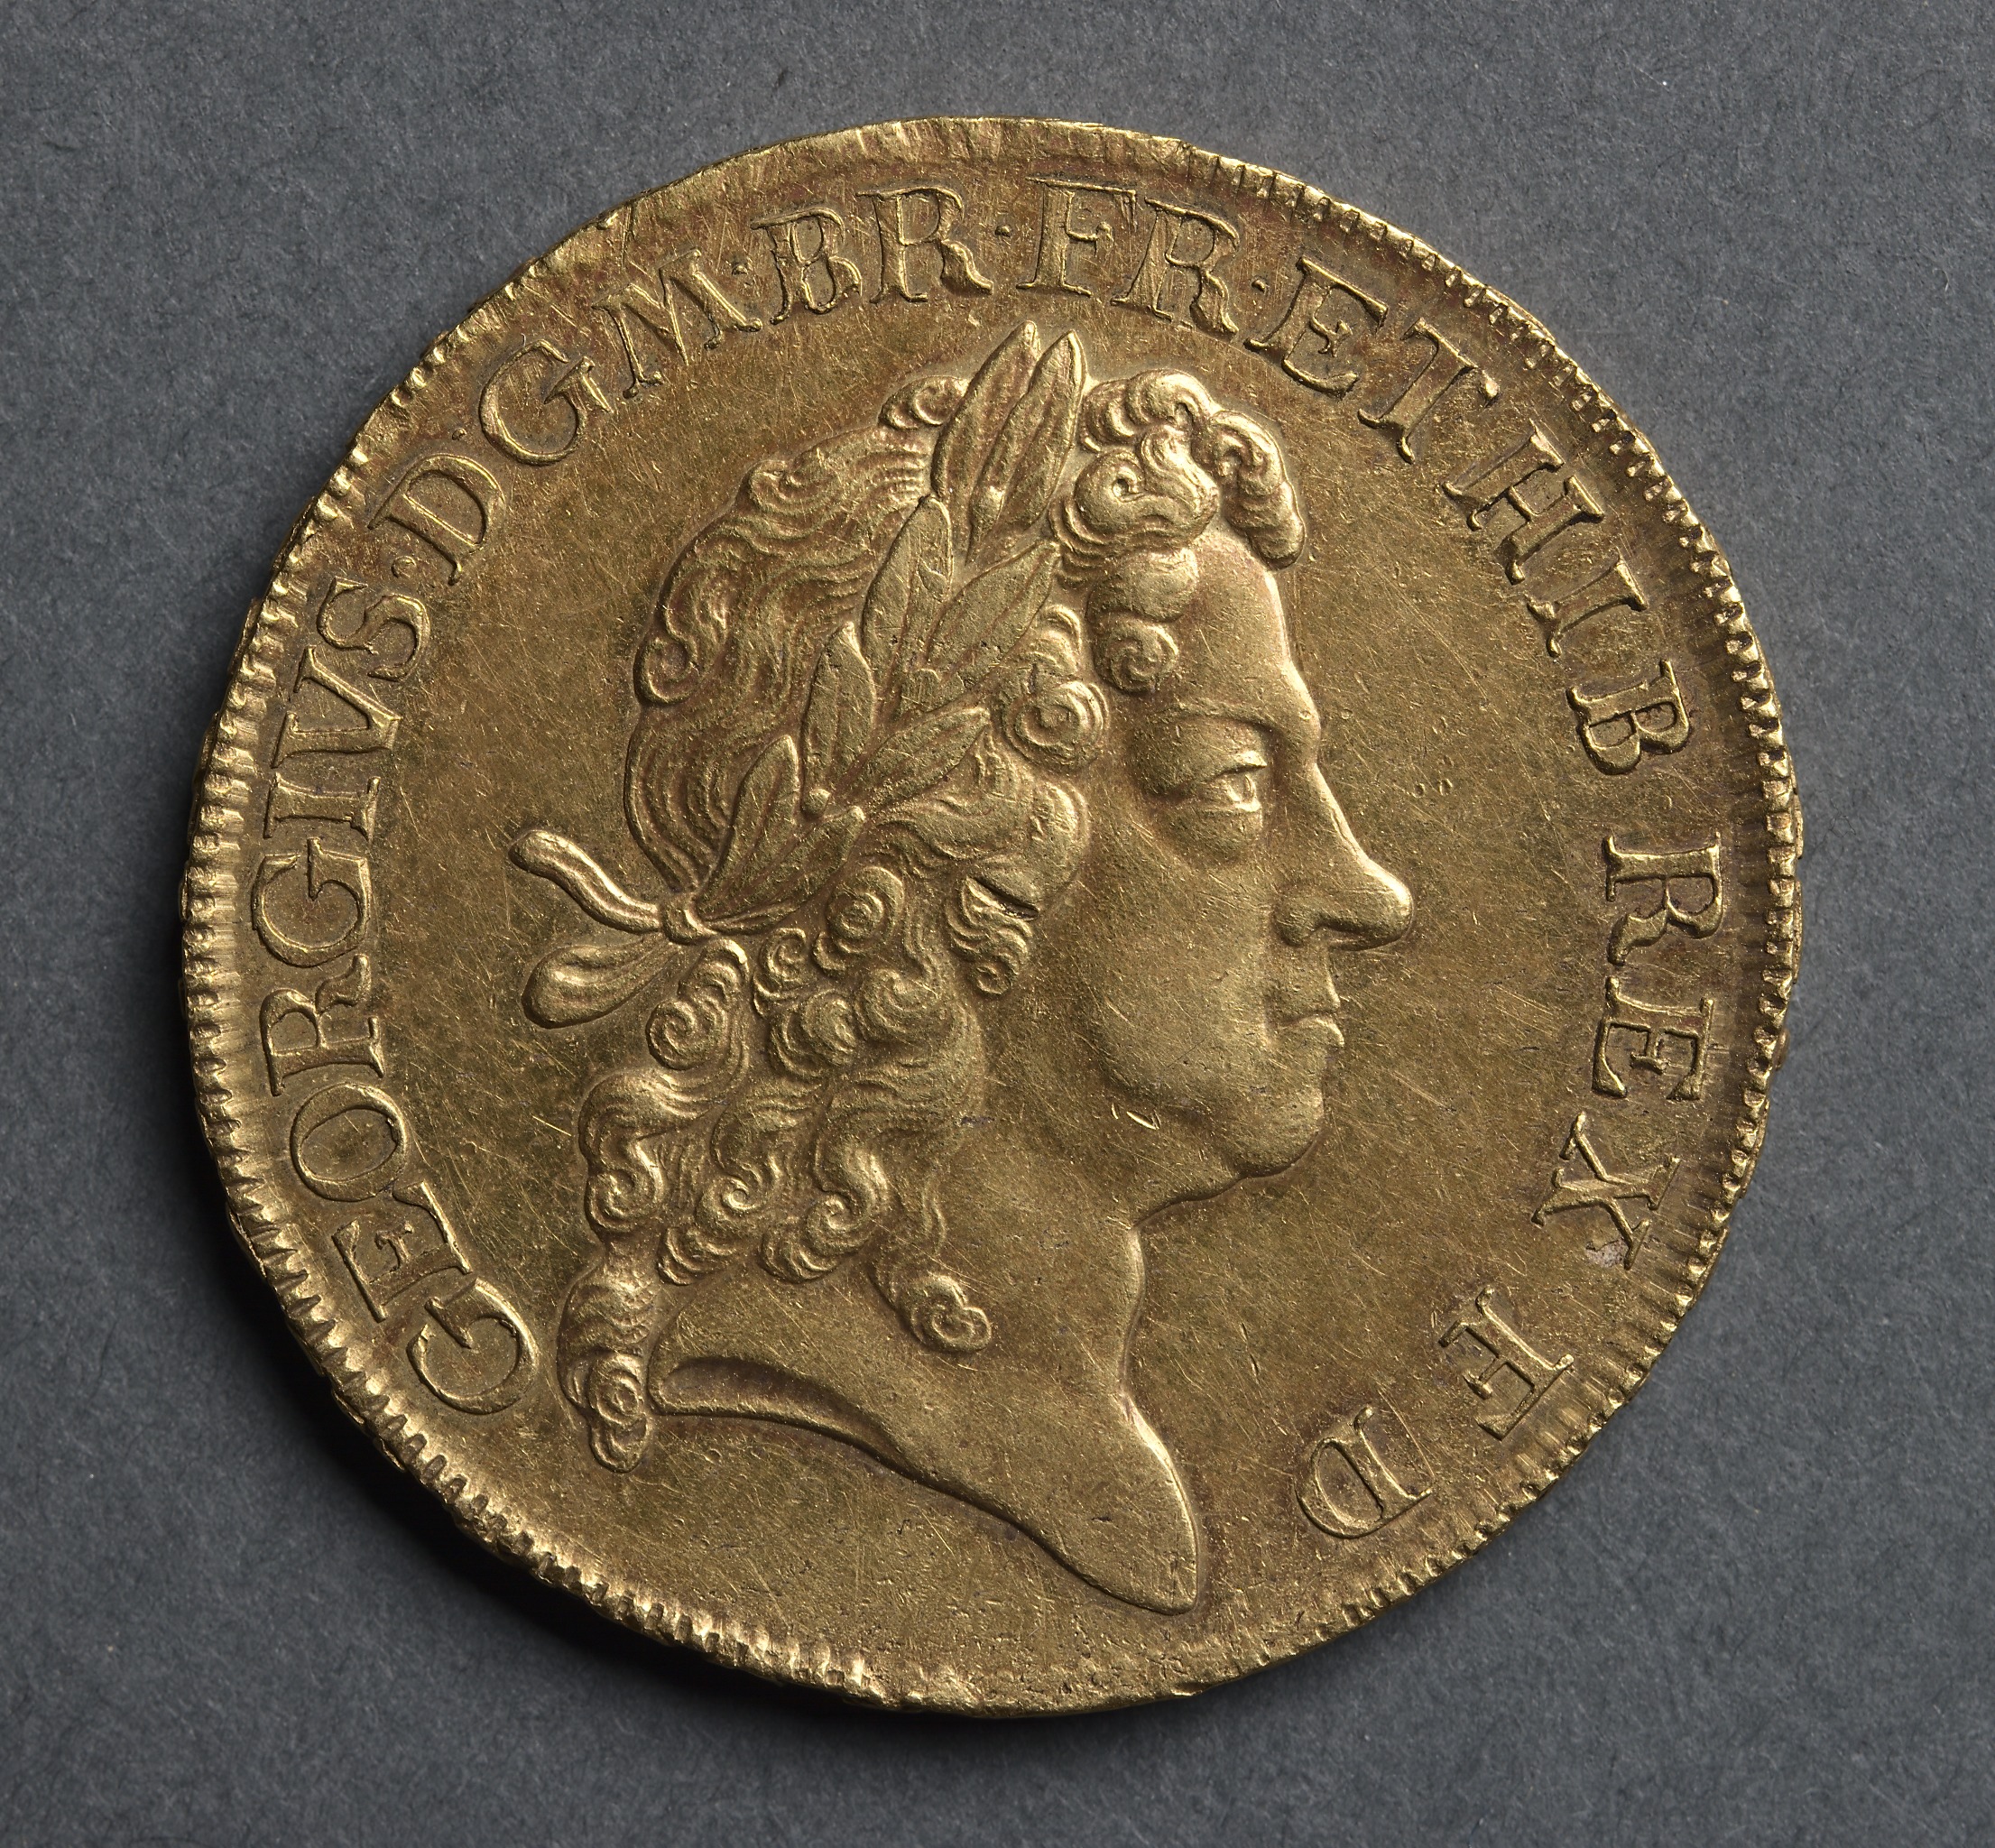 Five Guineas: George I (obverse)